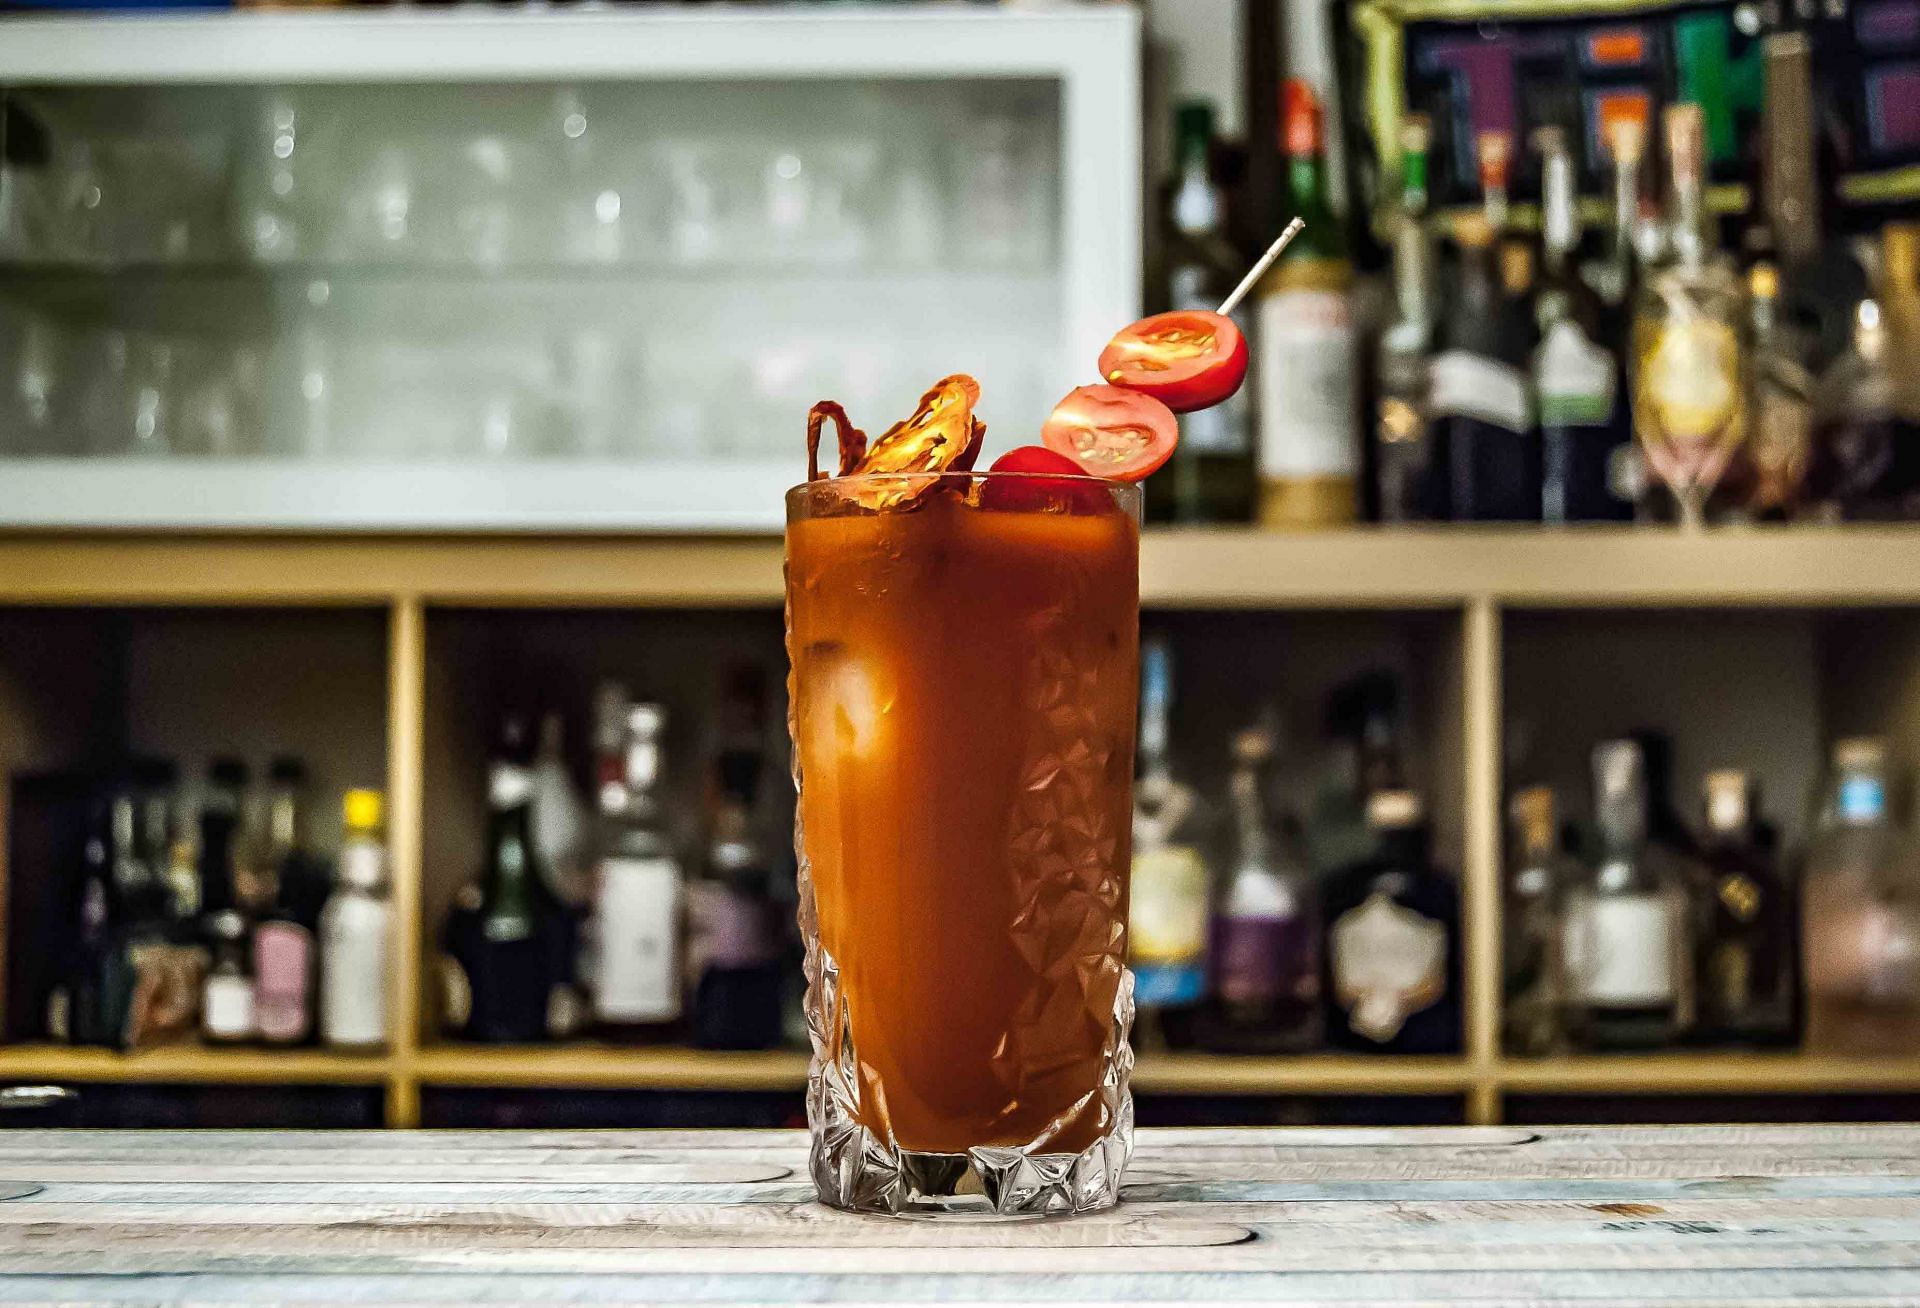 Worcestershire sauce adds flavor to Bloody Mary. (Image via Unsplash/Johann Trasch)